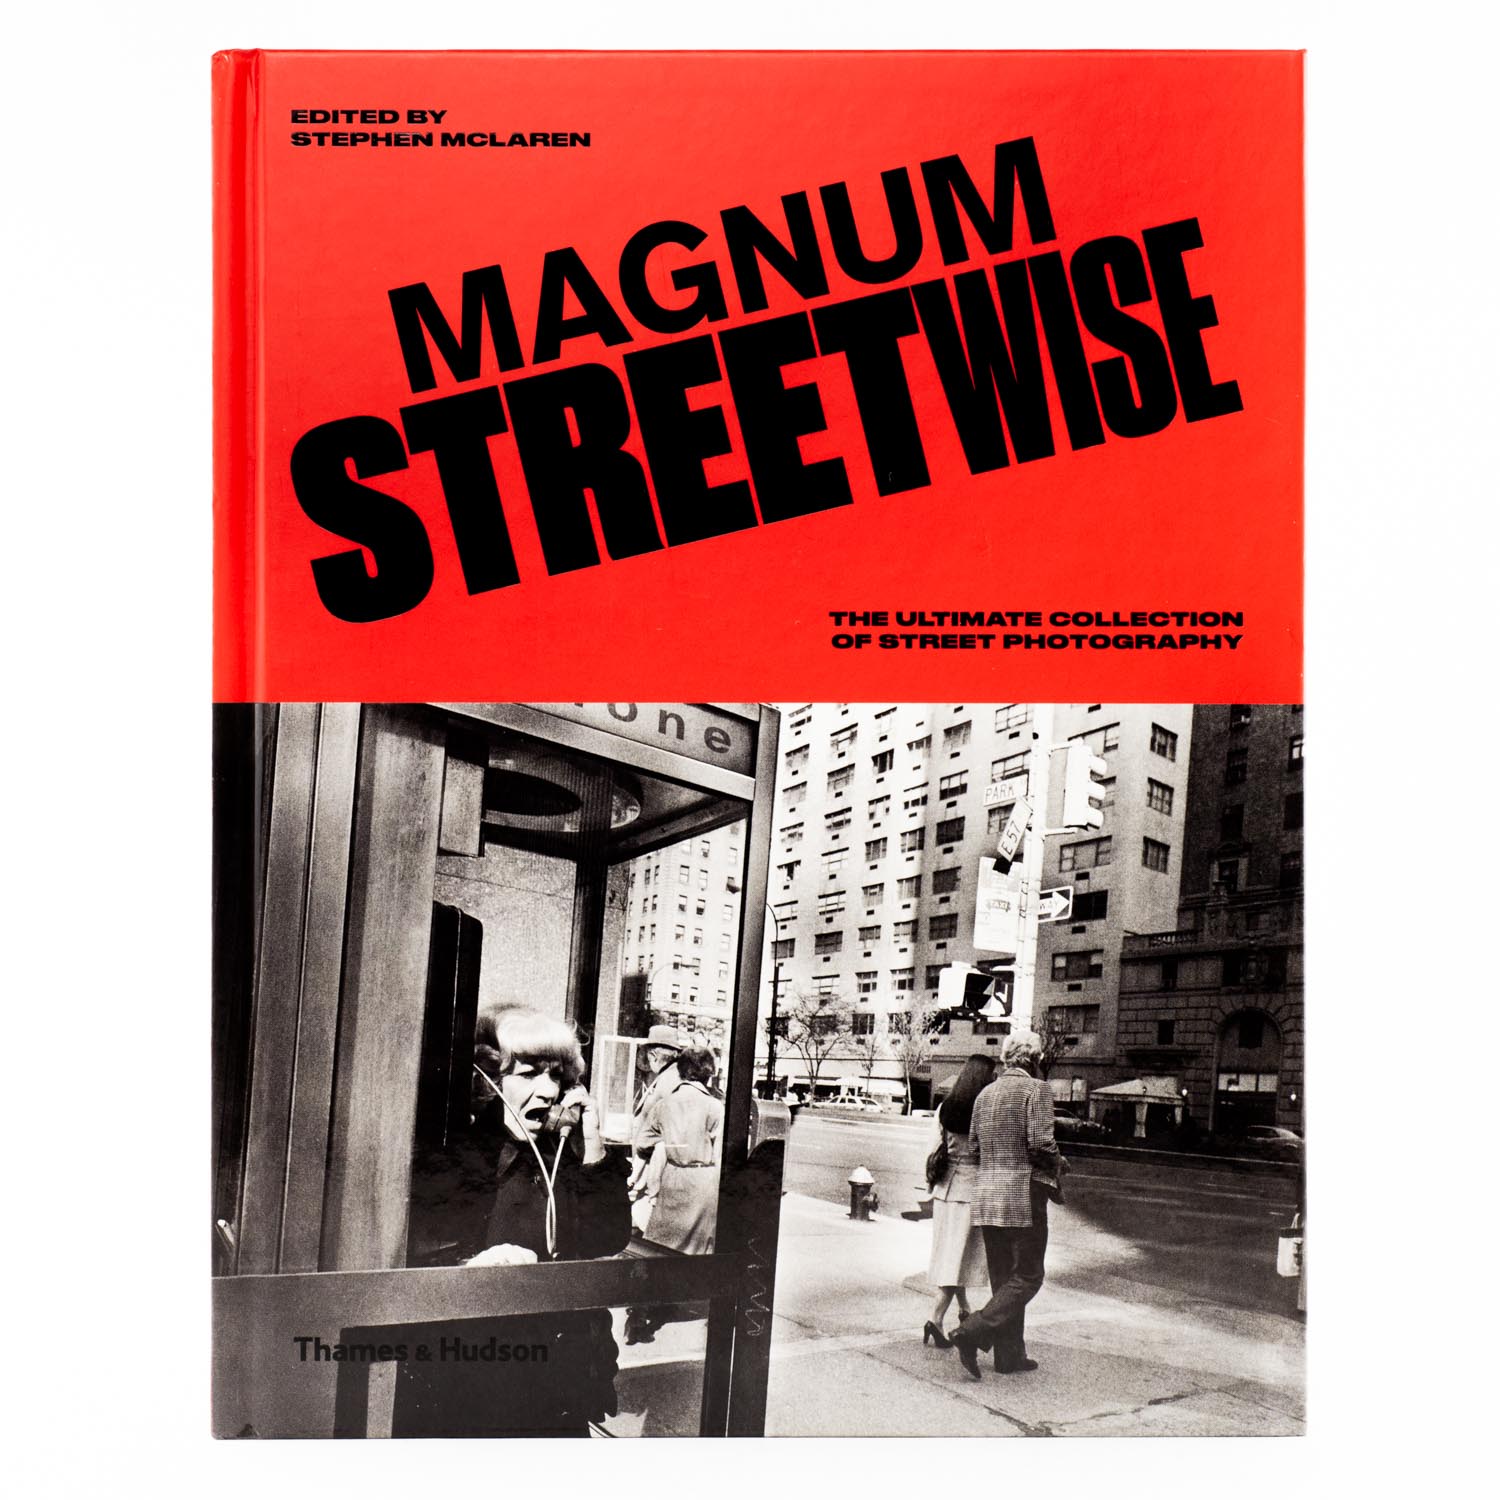 Magnum Streetwise The Ultimate Collection The Ultimate Collection of Street Photography 